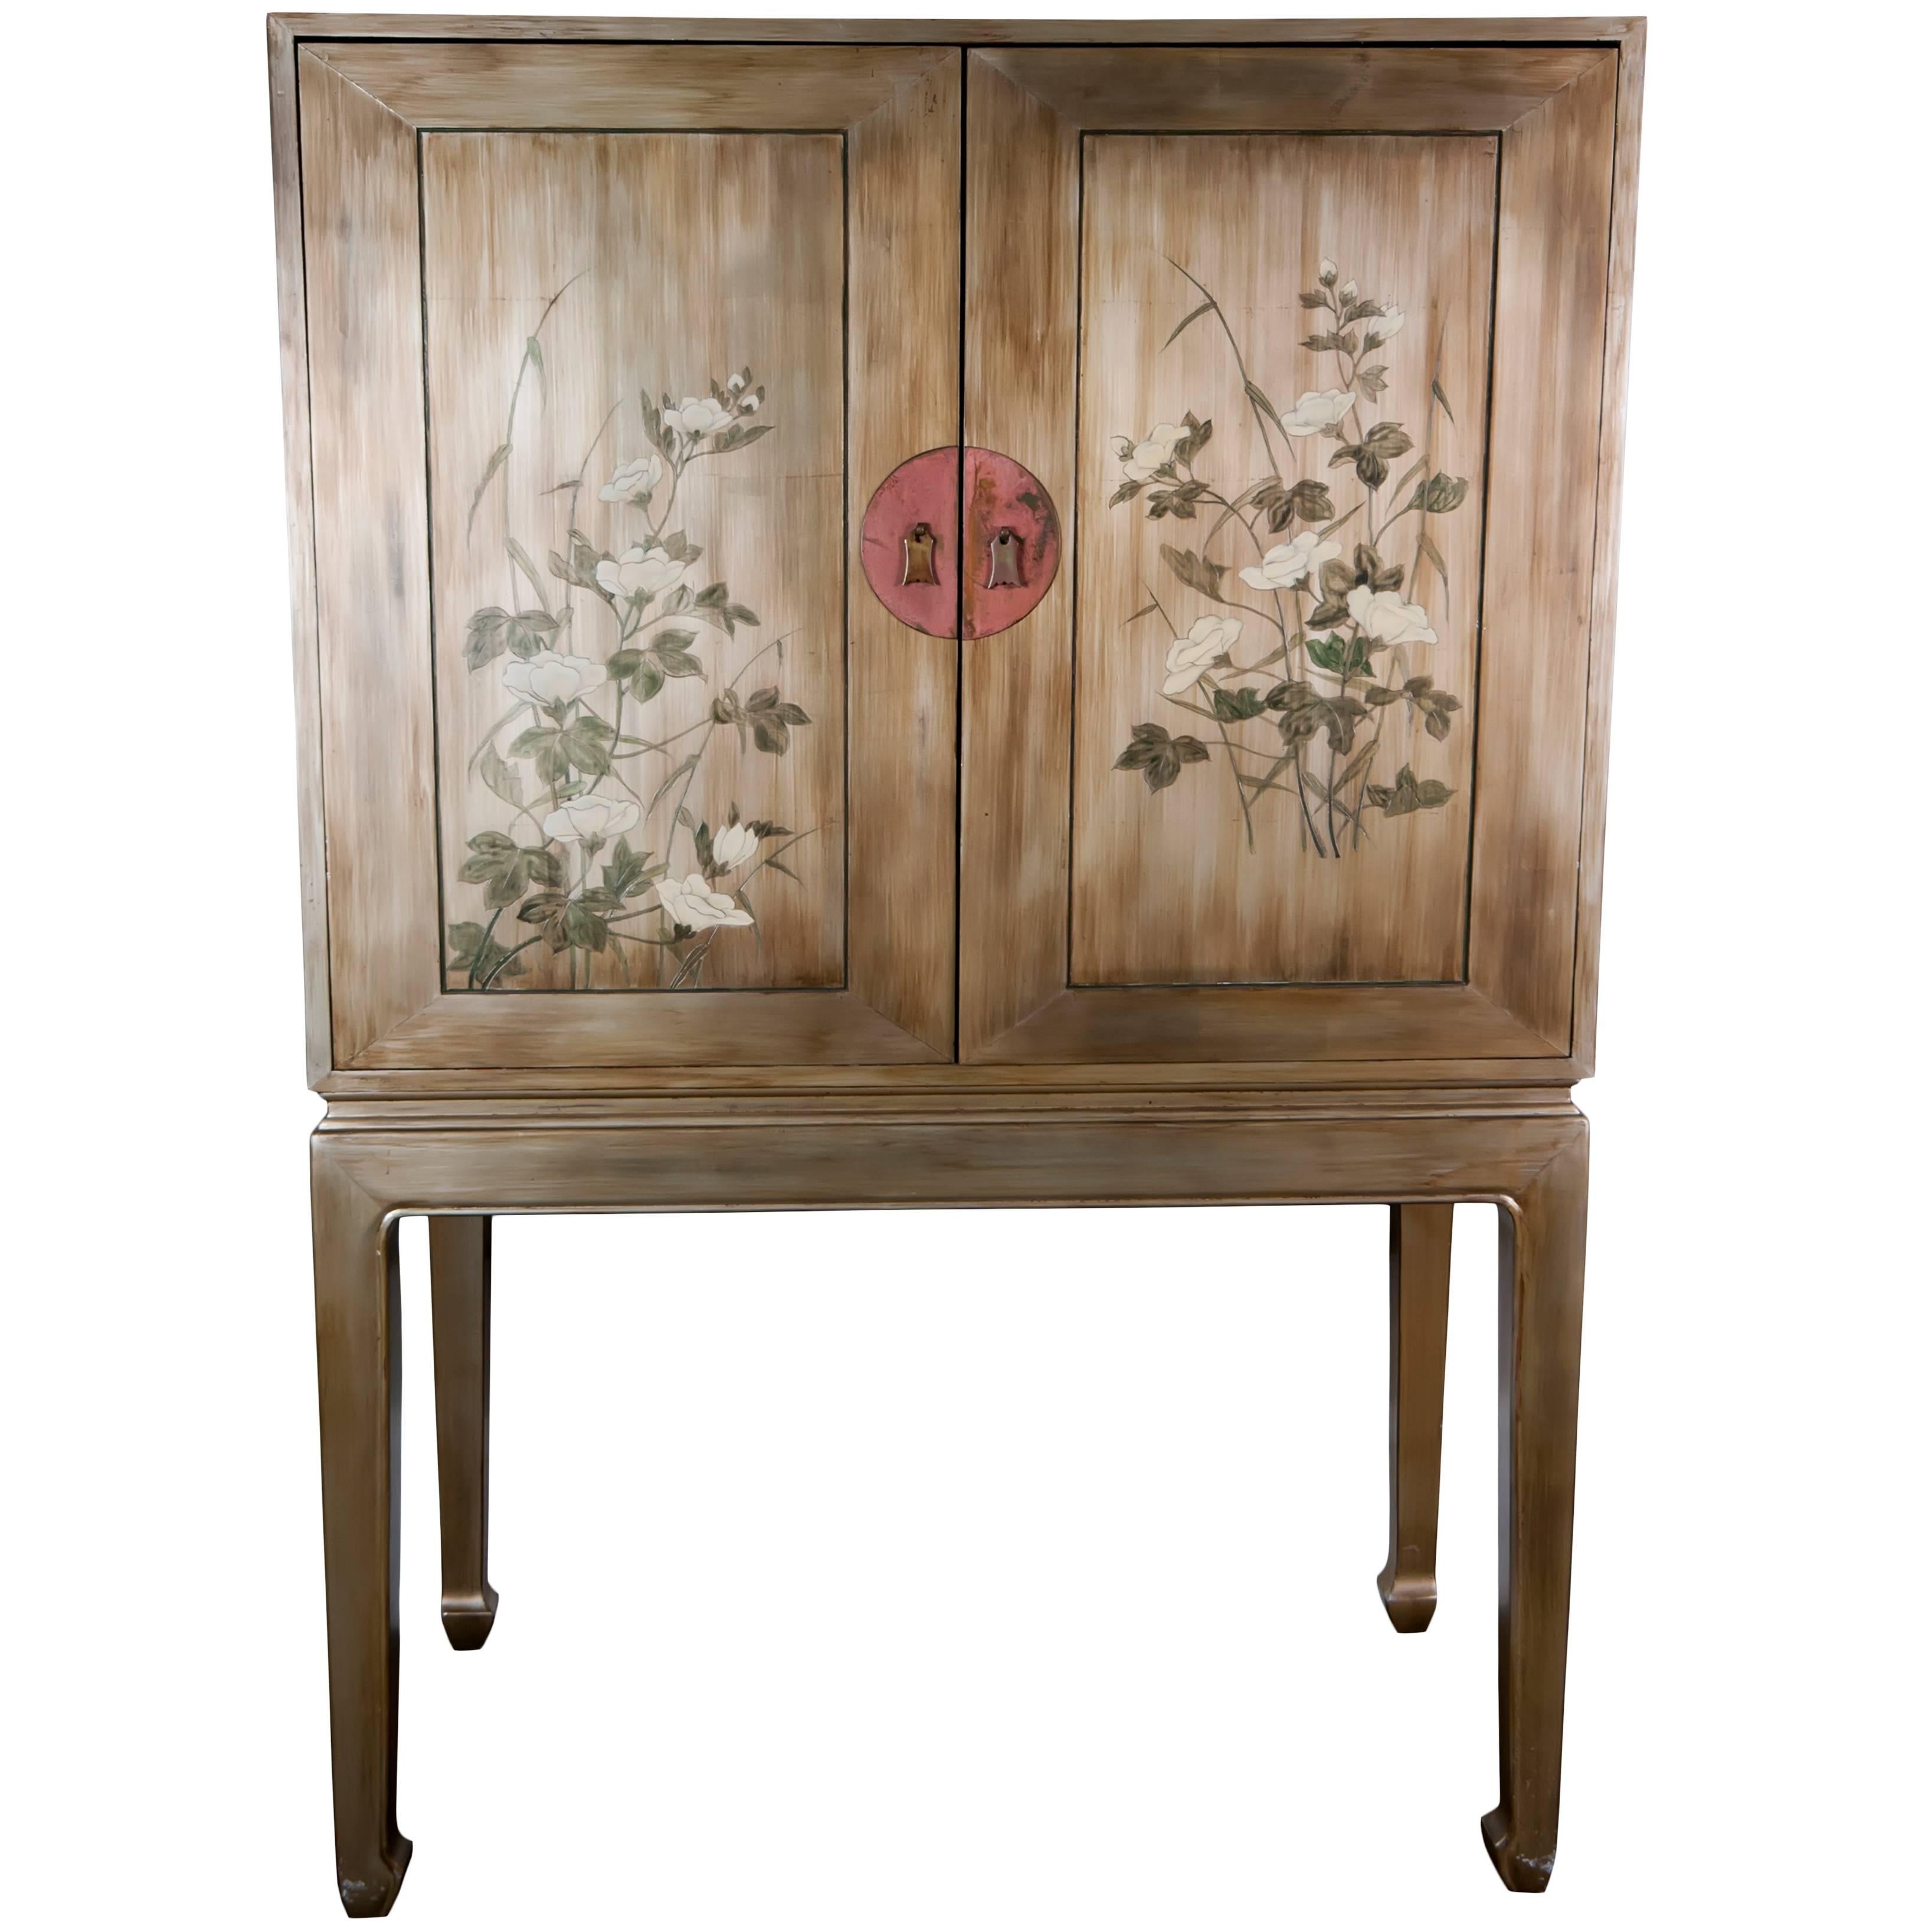 Max Khune Style Silvered Gold Cabinet with Asian Floral Painting